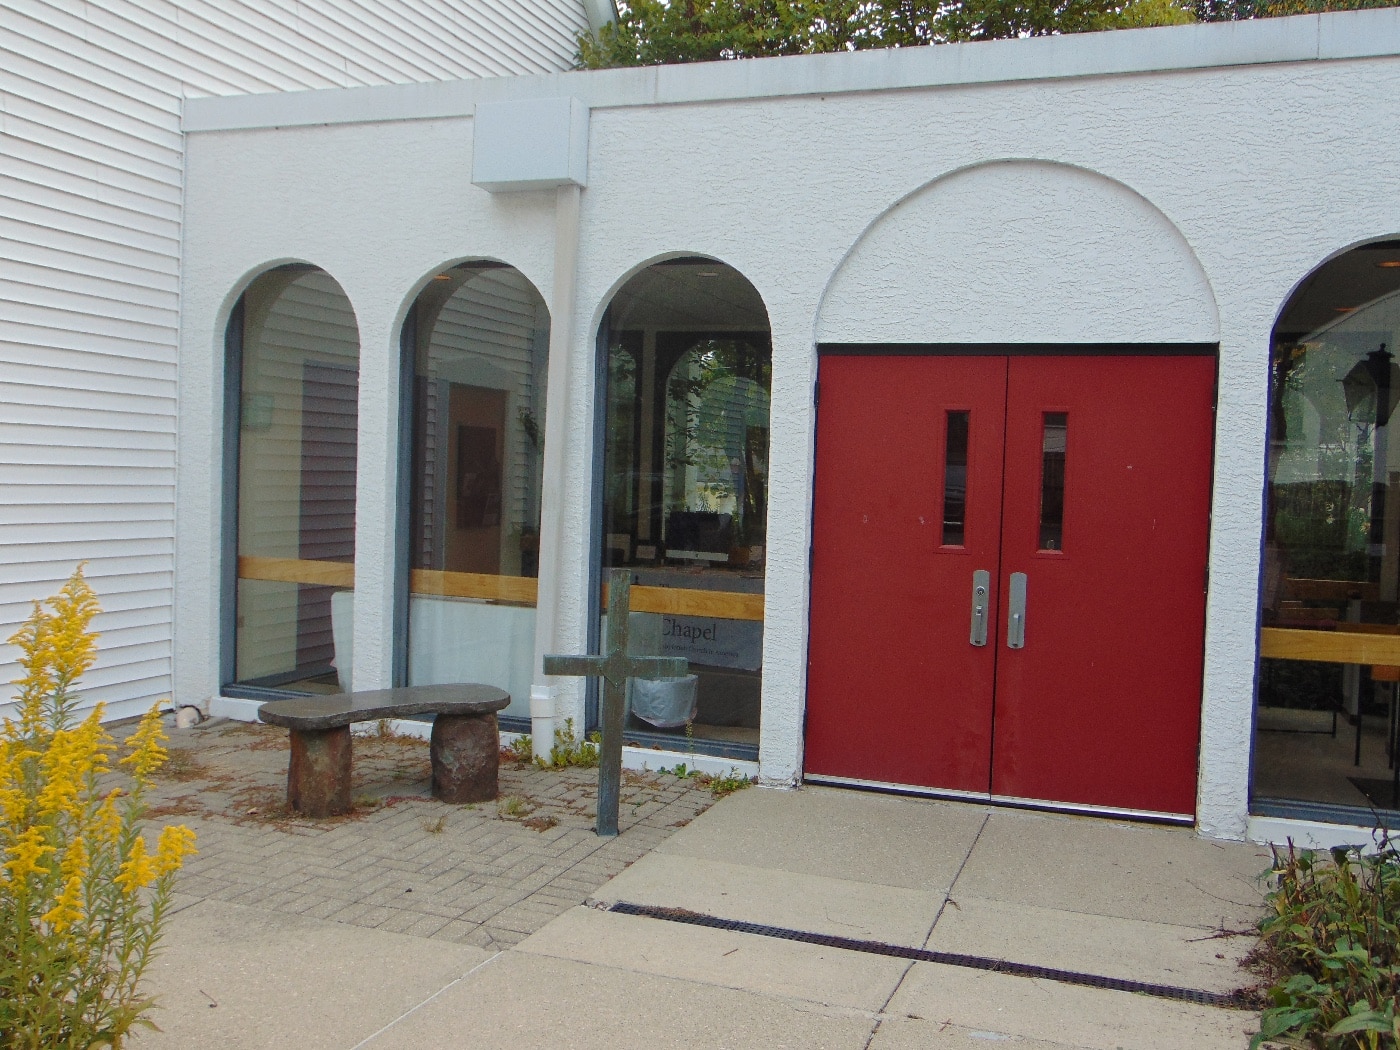 In this jpeg photograph, we see a set of double doors to the church sanctuary. 